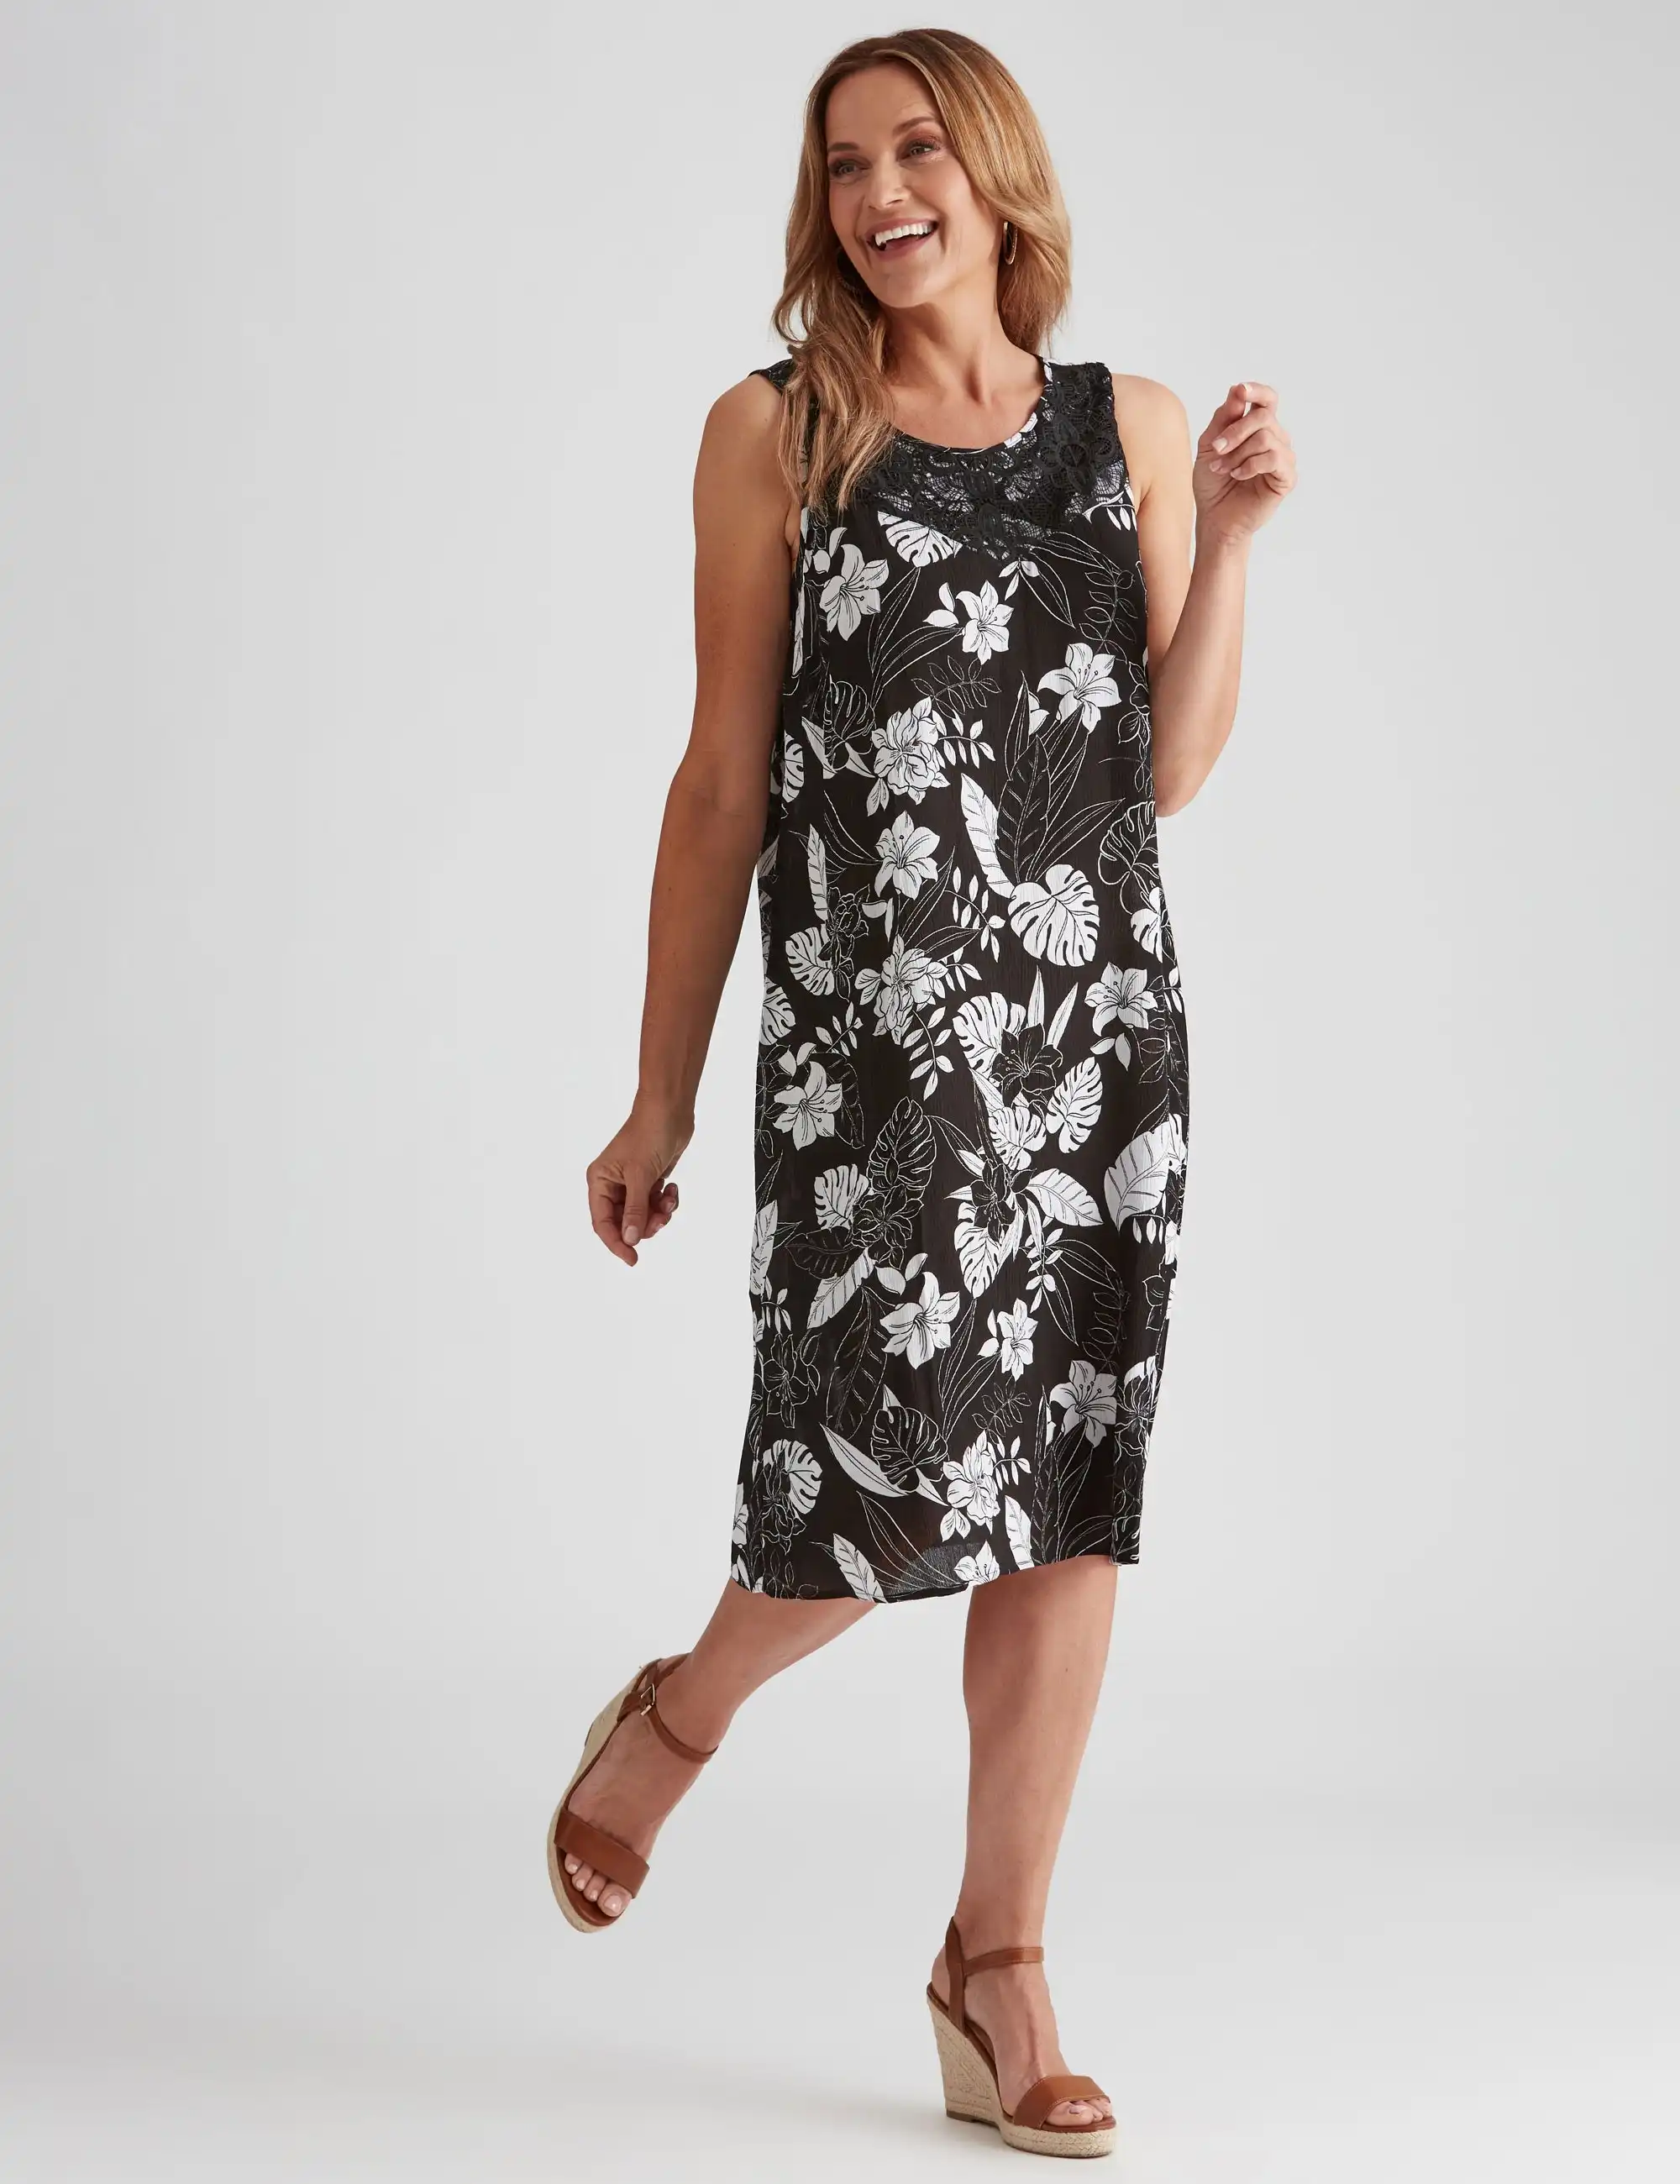 Millers Sleeveless Crile With Lace Motif Midi Dress